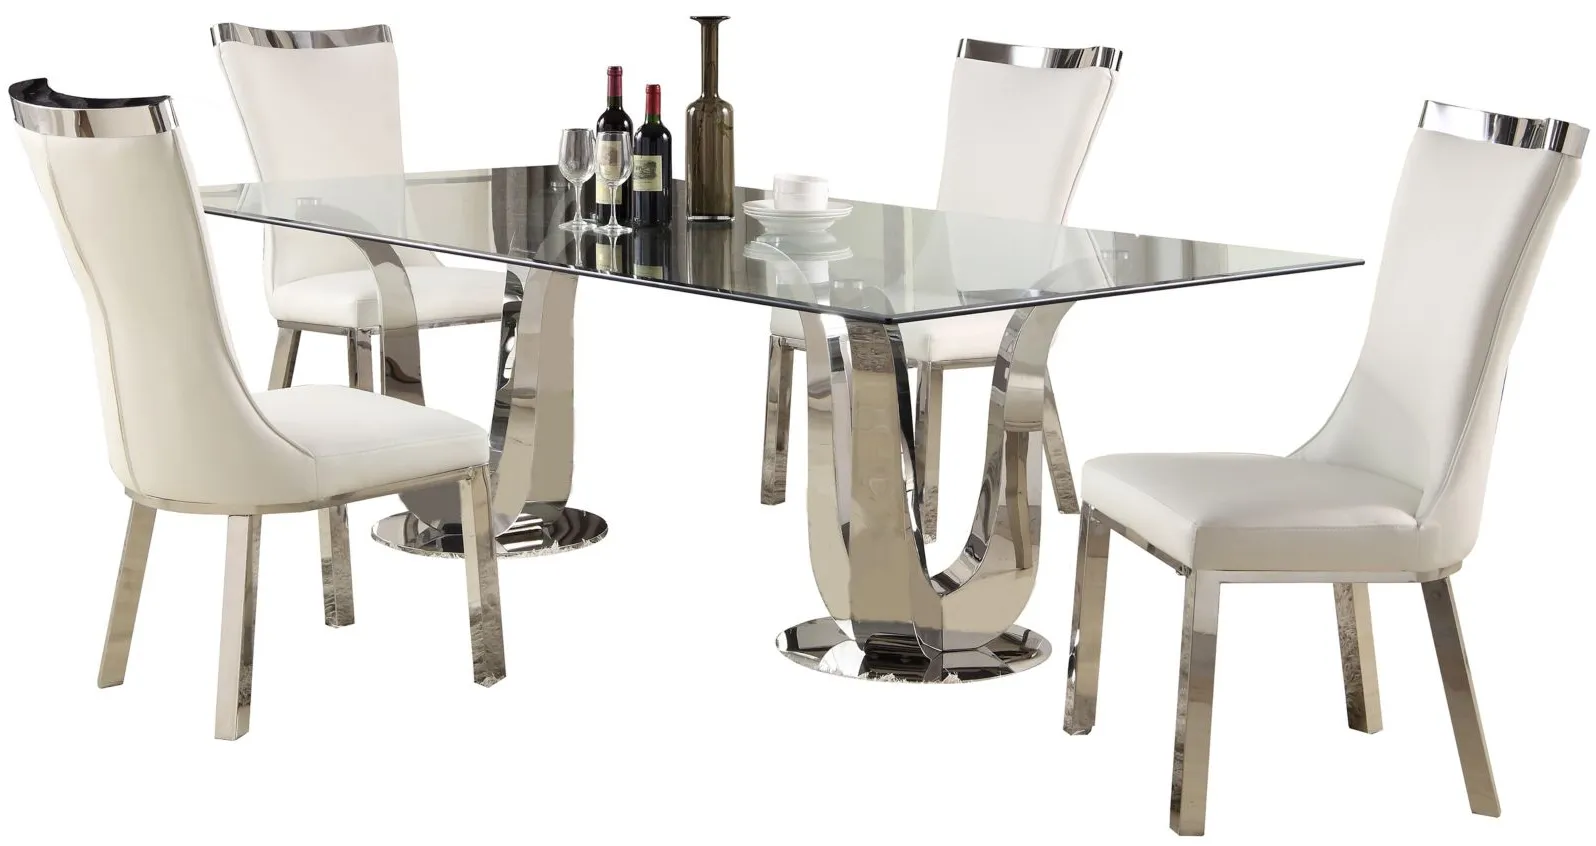 Adelle 5-pc. Dining Set in White by Chintaly Imports